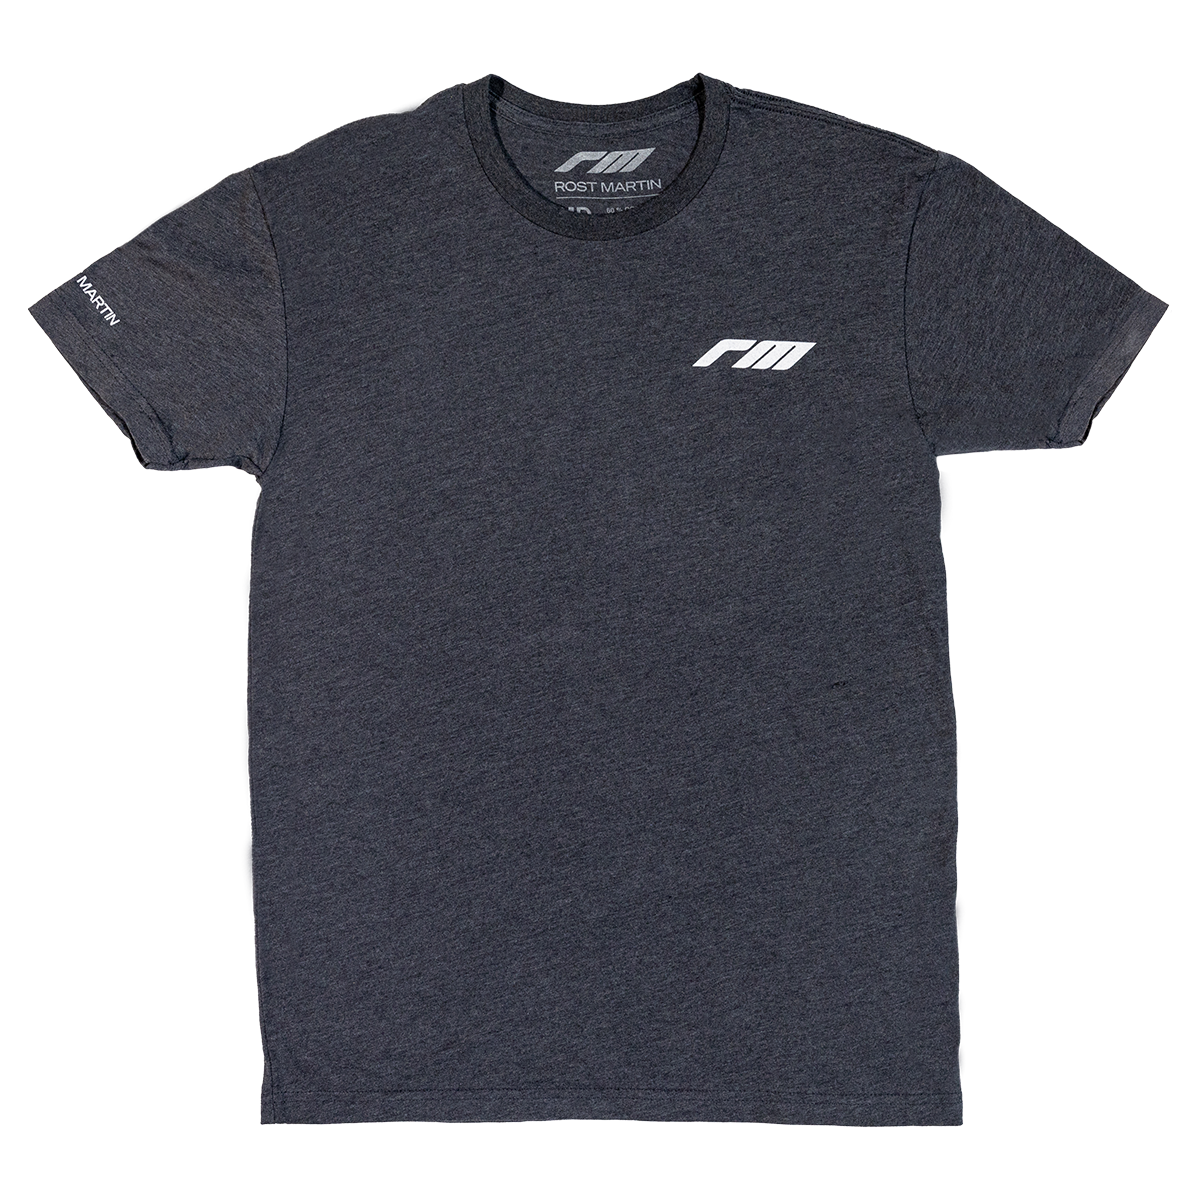 Product: Rost Martin Signature Tee – Charcoal